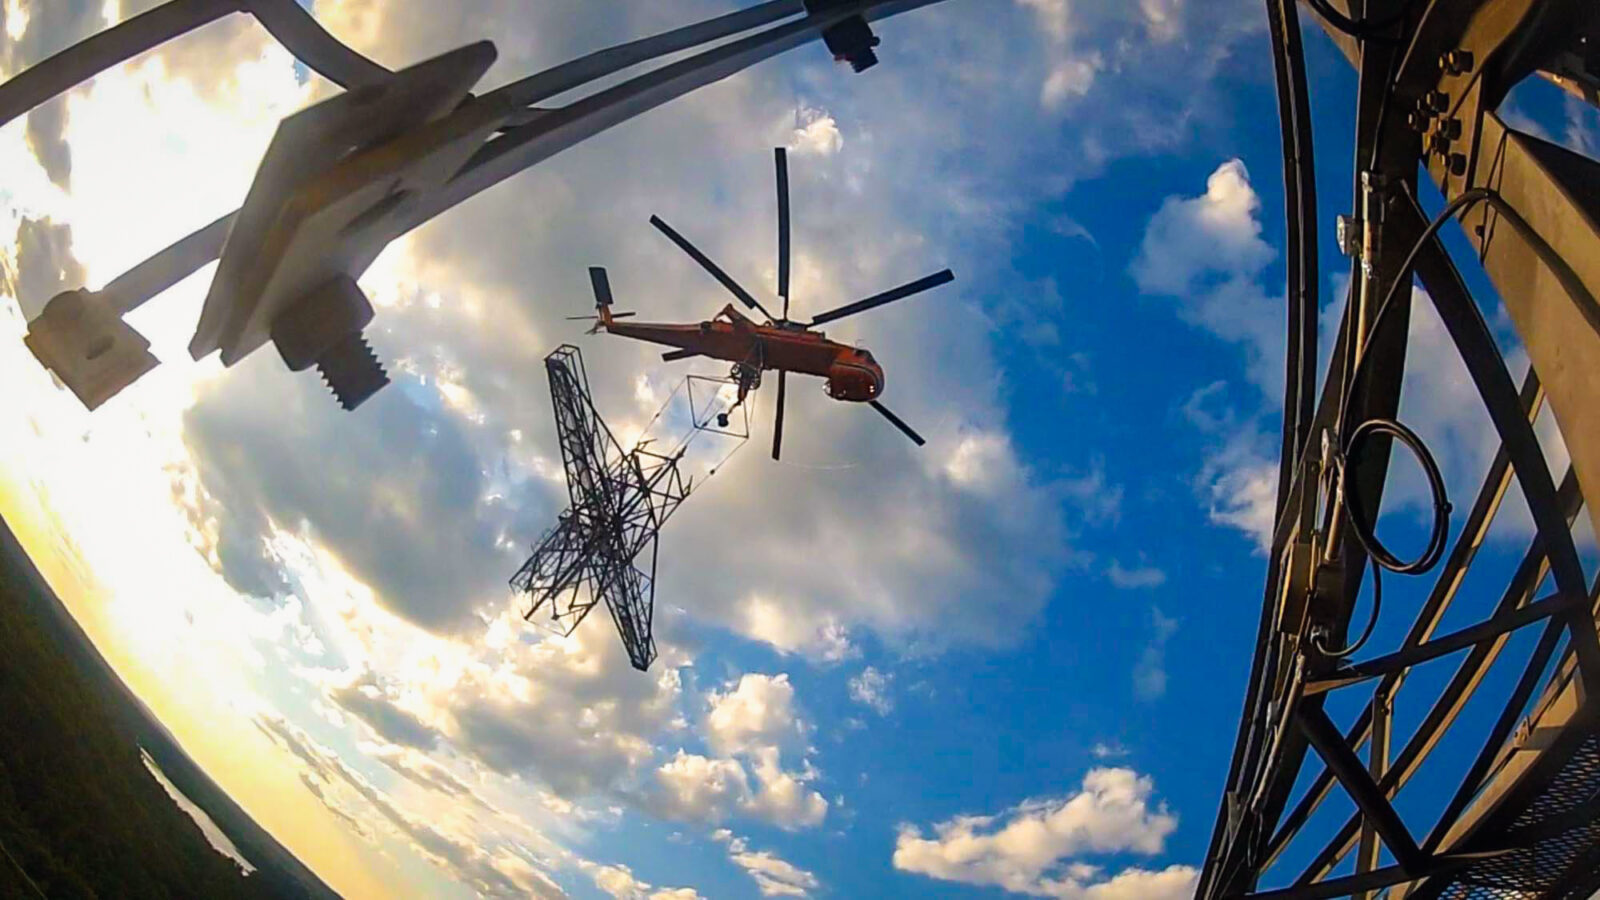 Orange helicopter carrying large piece of metal structure